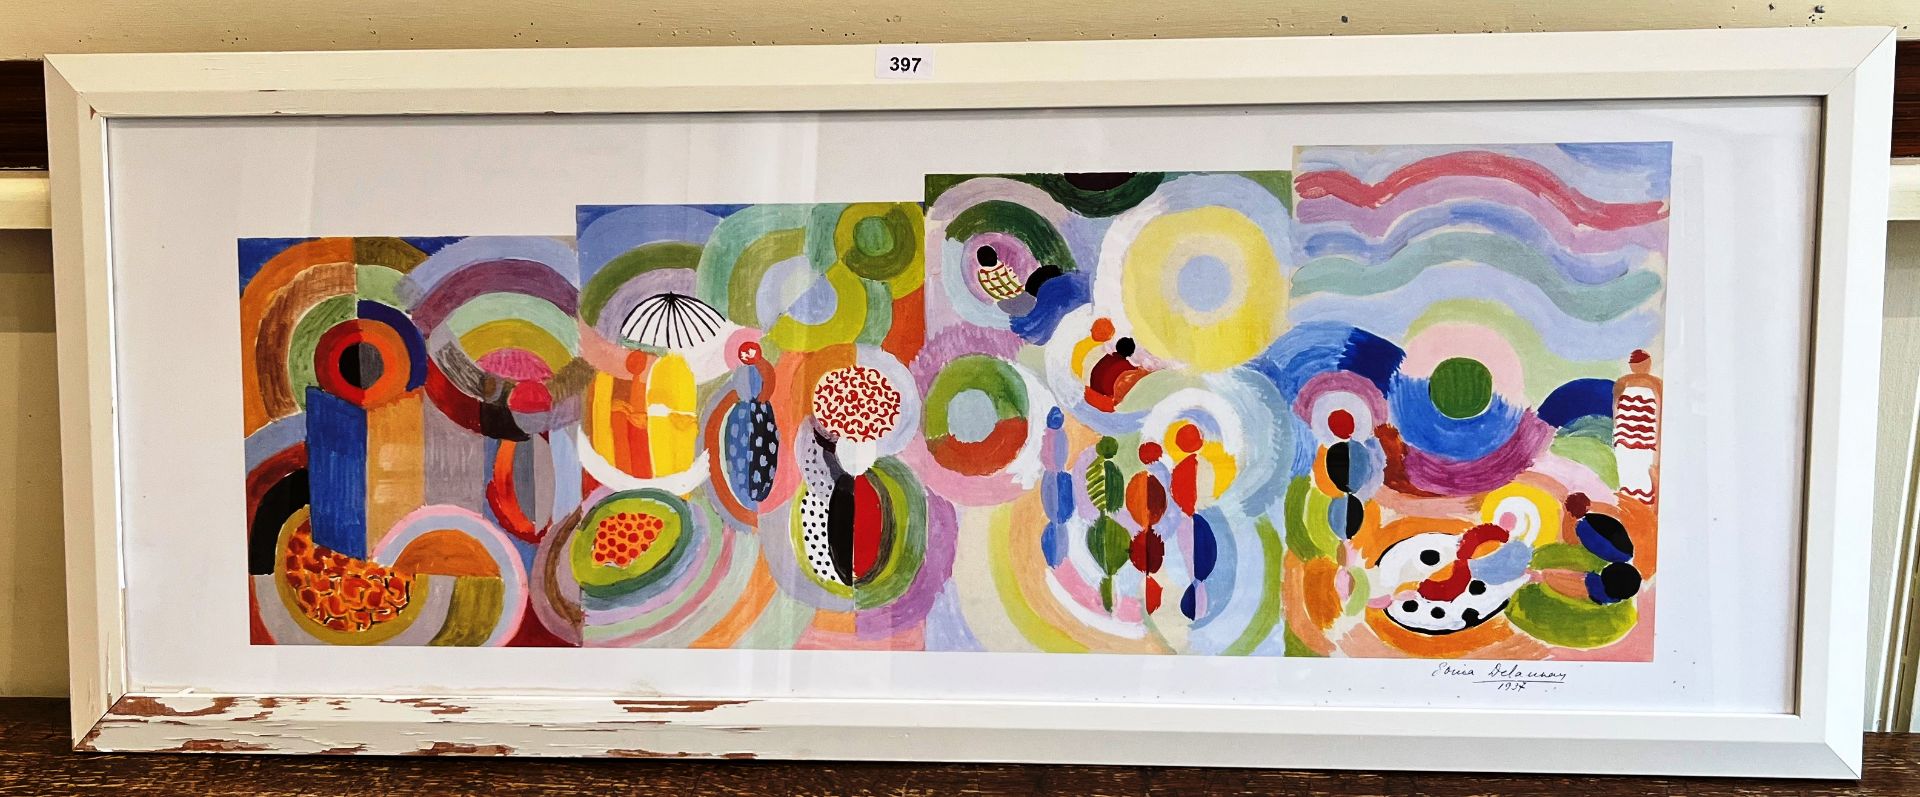 A SONIA DELAUNAY PICTURE 'VOYAGES'